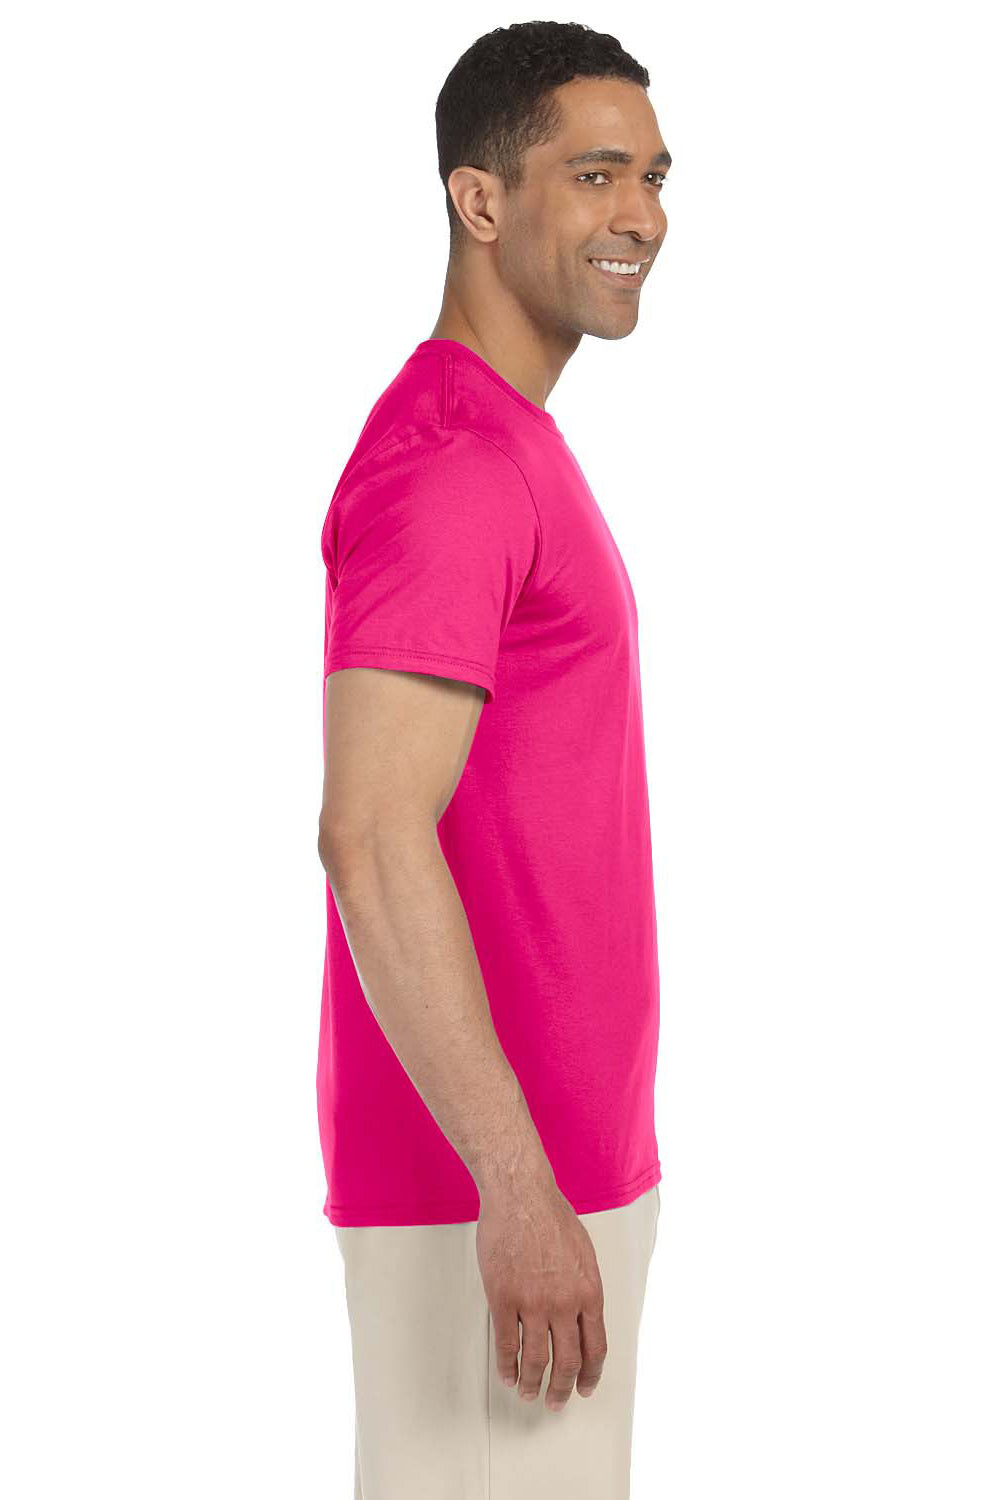 Gildan G640 Mens Softstyle Short Sleeve Crewneck T-Shirt Antique Heliconia Pink Side